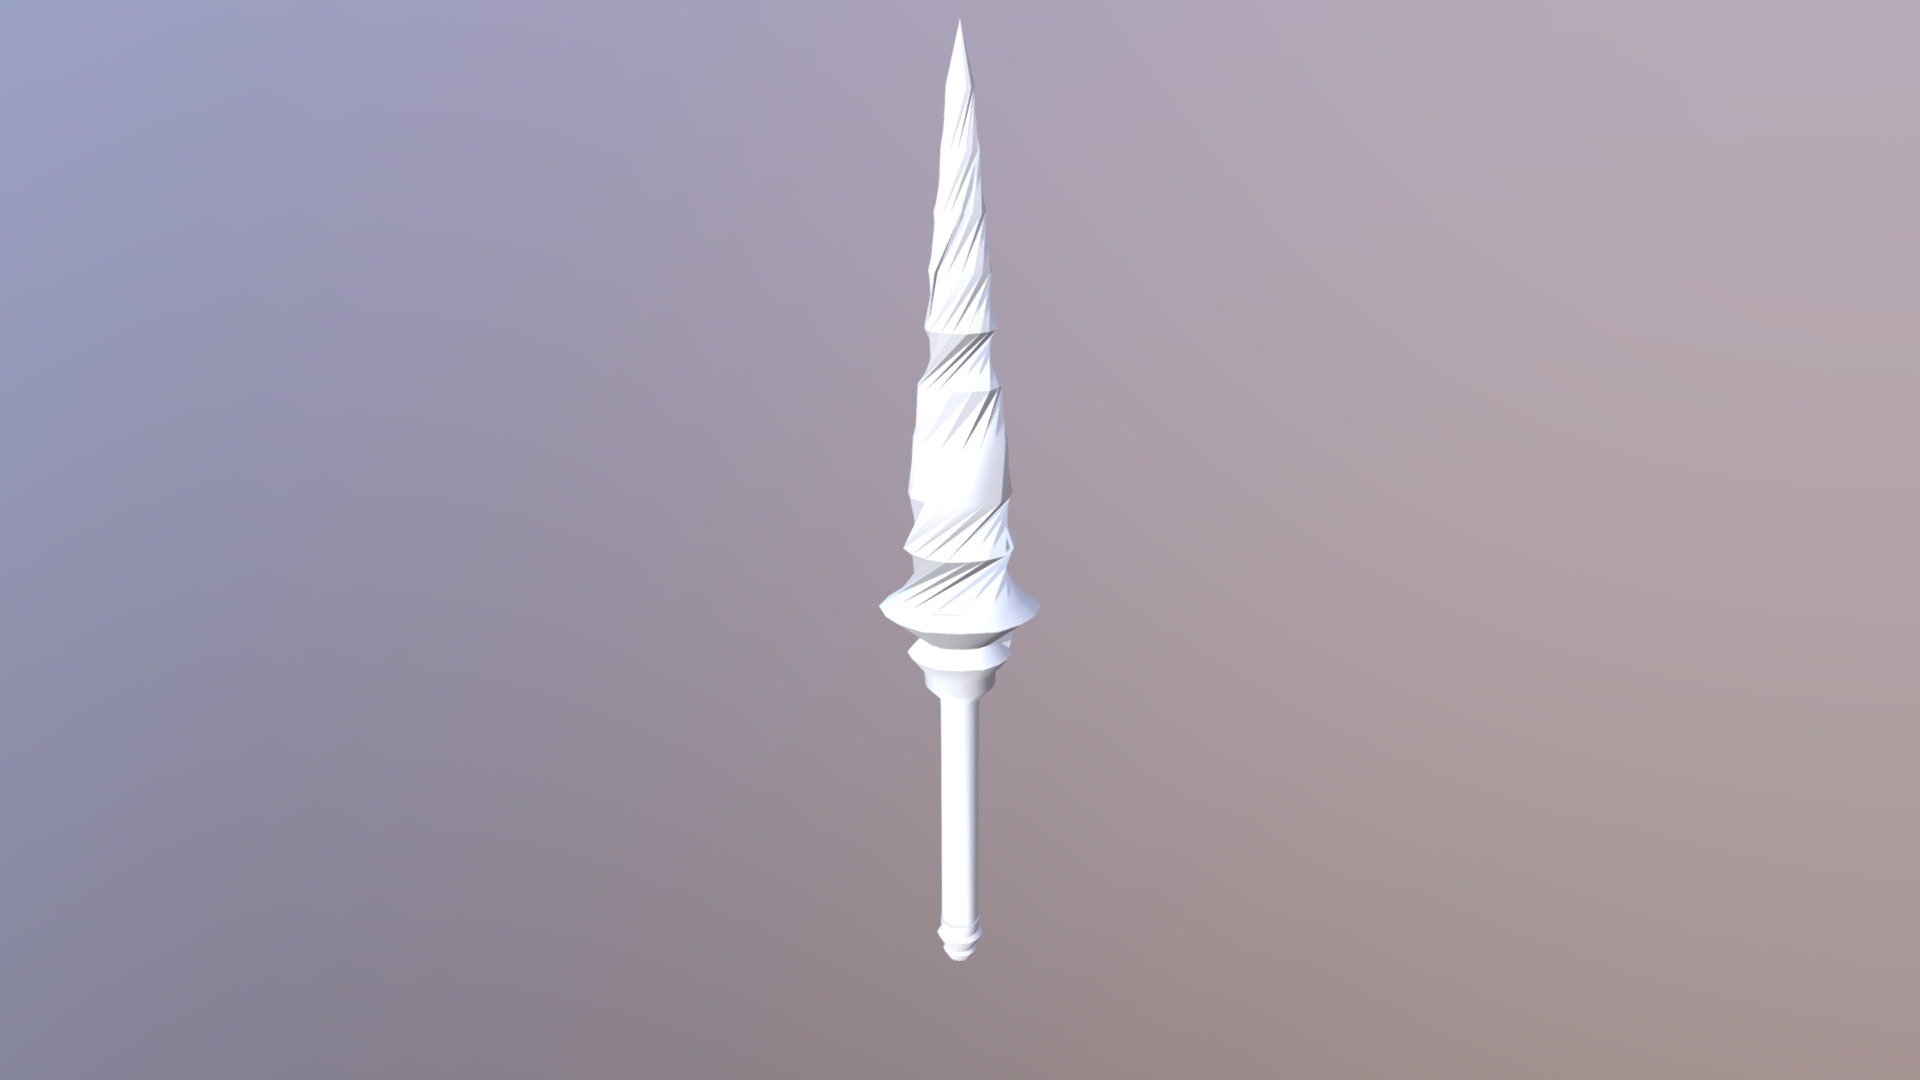 Trying to model Fergus Mac Roich's sword, Caladbolg, as it appeared in Fate/Grand Order. Still working on the spikes and will eventually try to texture 3d model